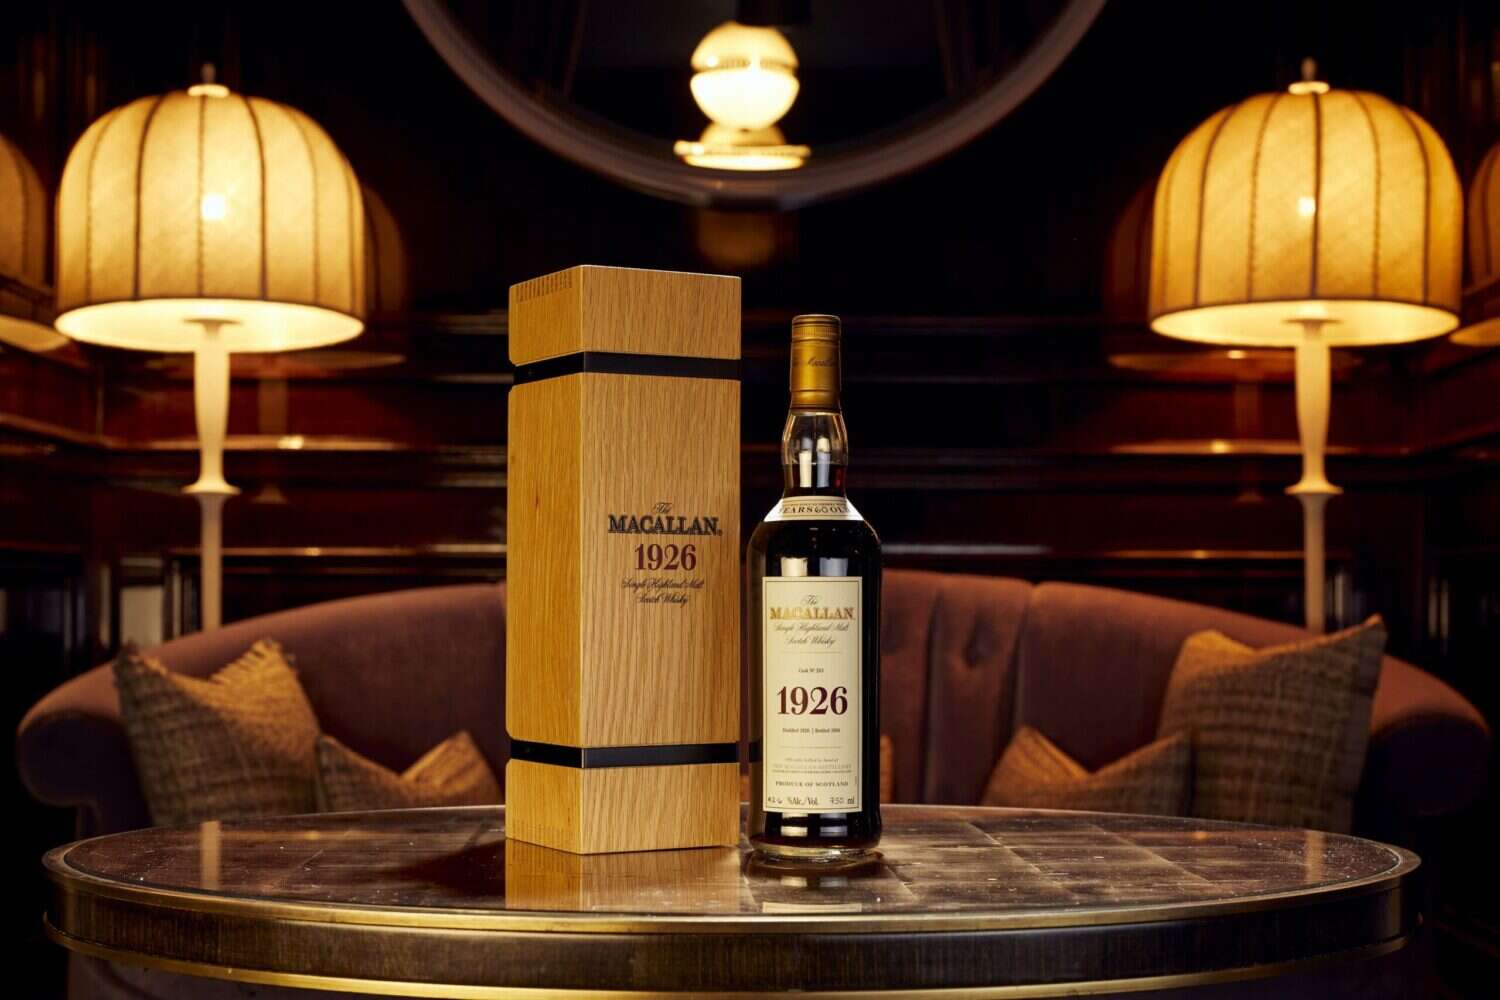 The Macallan 1926 Tipped to Break Whisky Auction Record